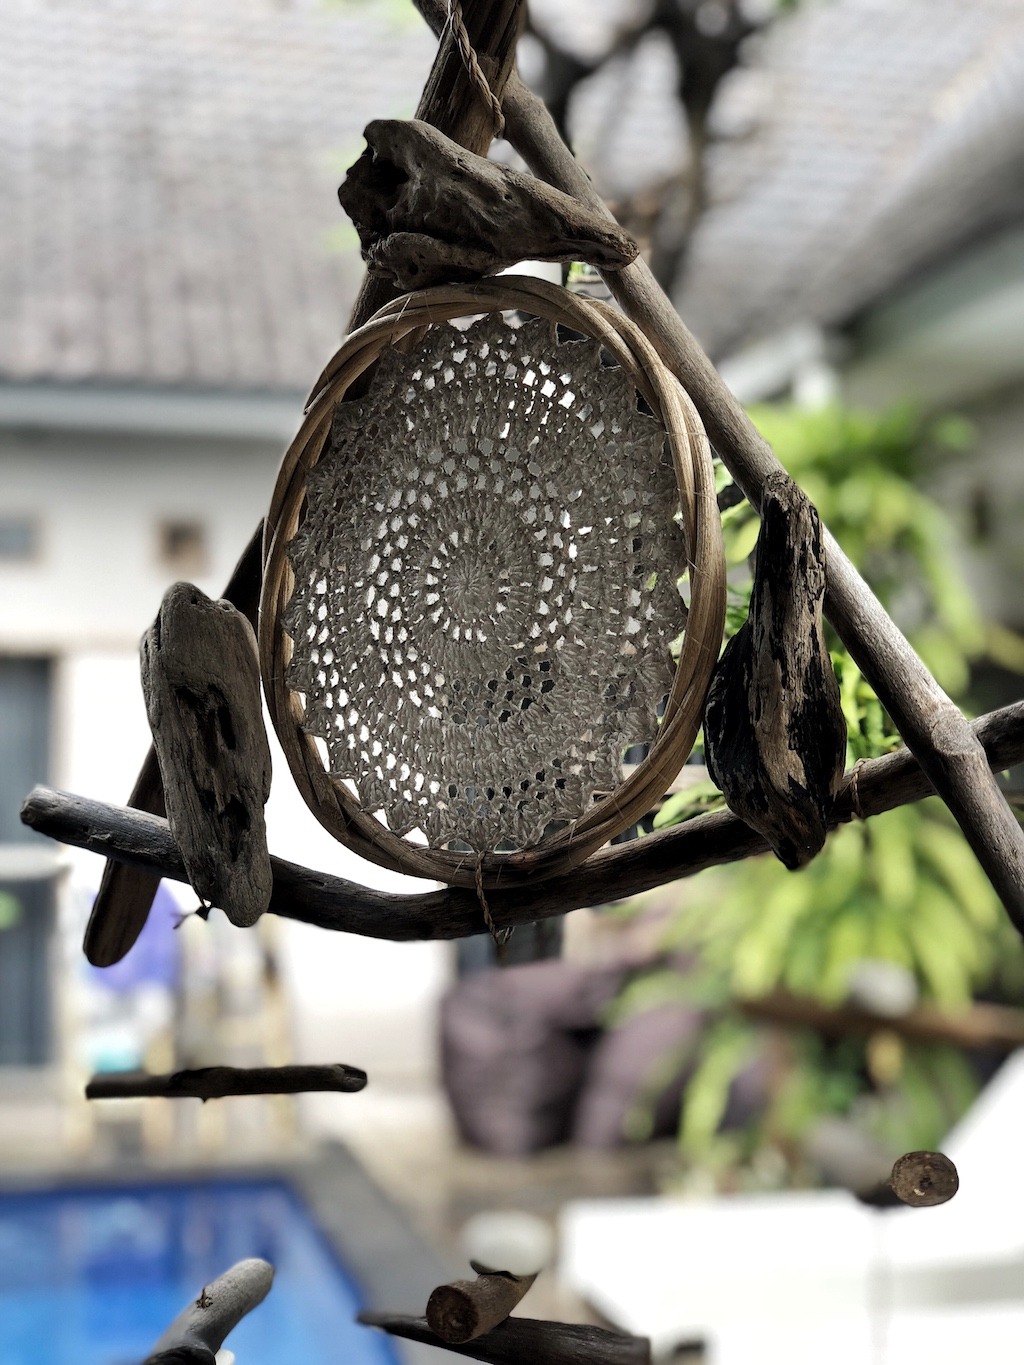 Hostel Recommendation While Travelling to Kuta – Lokal Bali Hostel Dream Catcher